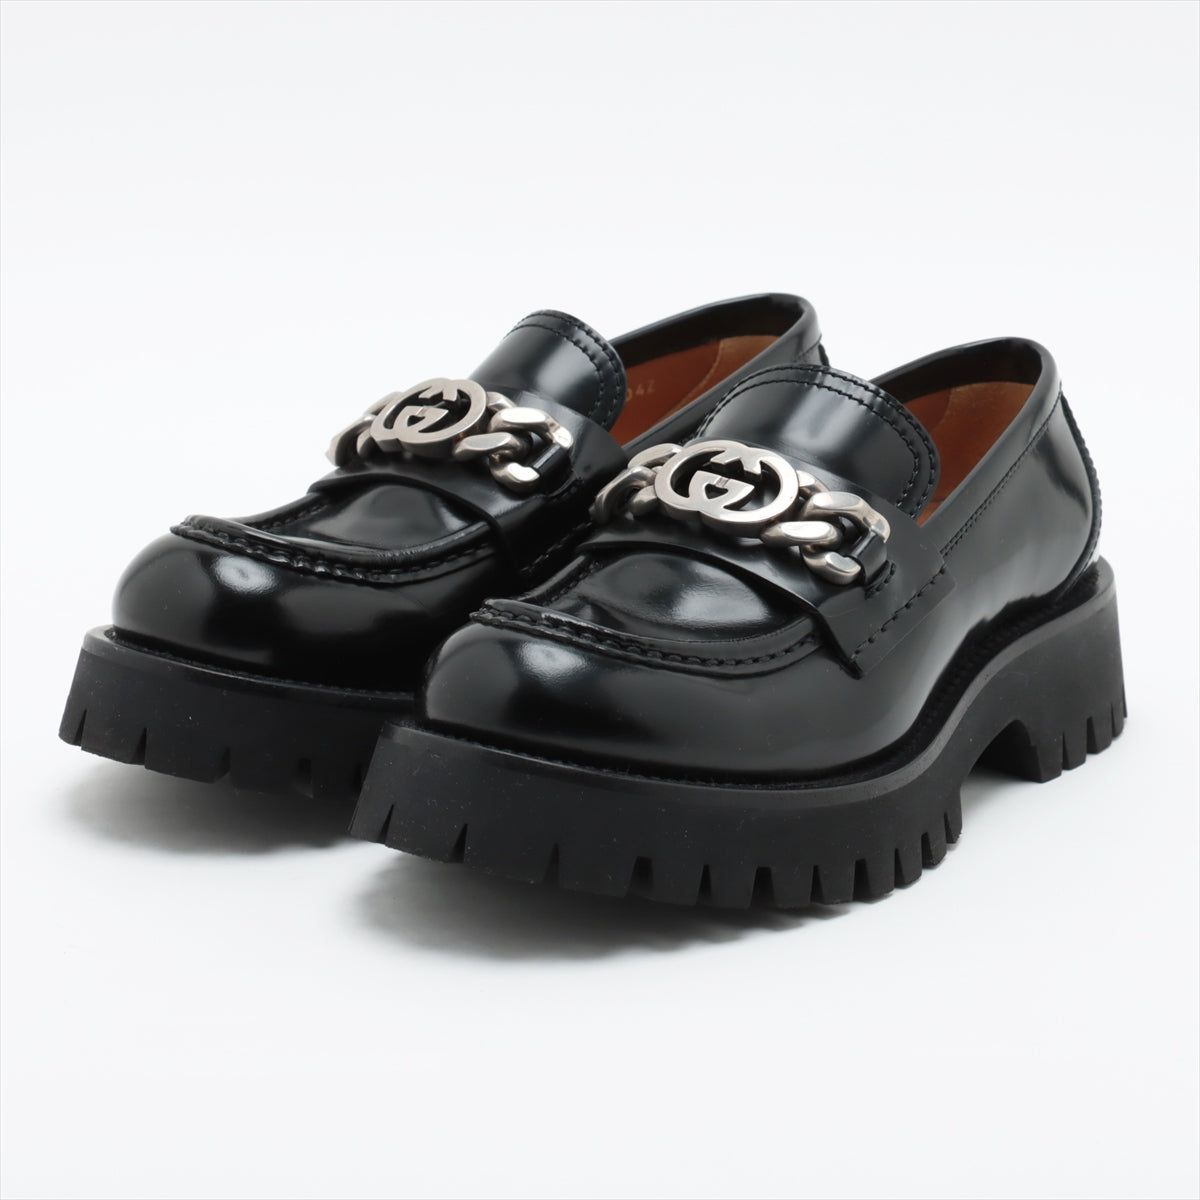 Gucci Patent leather Loafer 37.5 Ladies' Black 752650 Lug sole GG Chain